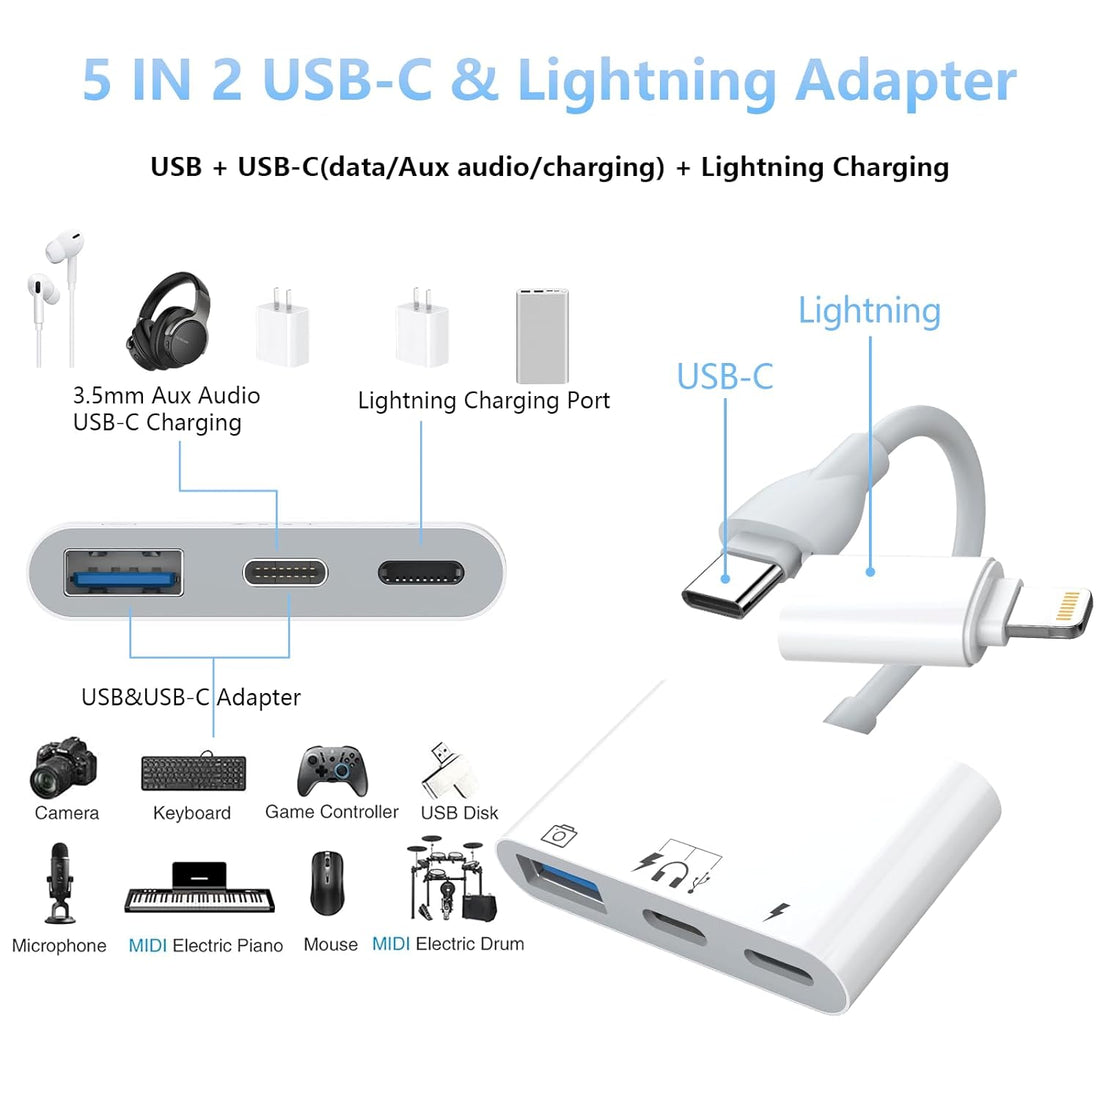 USB C Lightning to USB Camera Adapter for iPhone 15 Type C Audio Dongle Cable with PD60W Fast Charging Port for iPhone/iPad/Samsung/Laptops to Connect Card Reader USB Flash Drive U Disk Keyboard Mouse